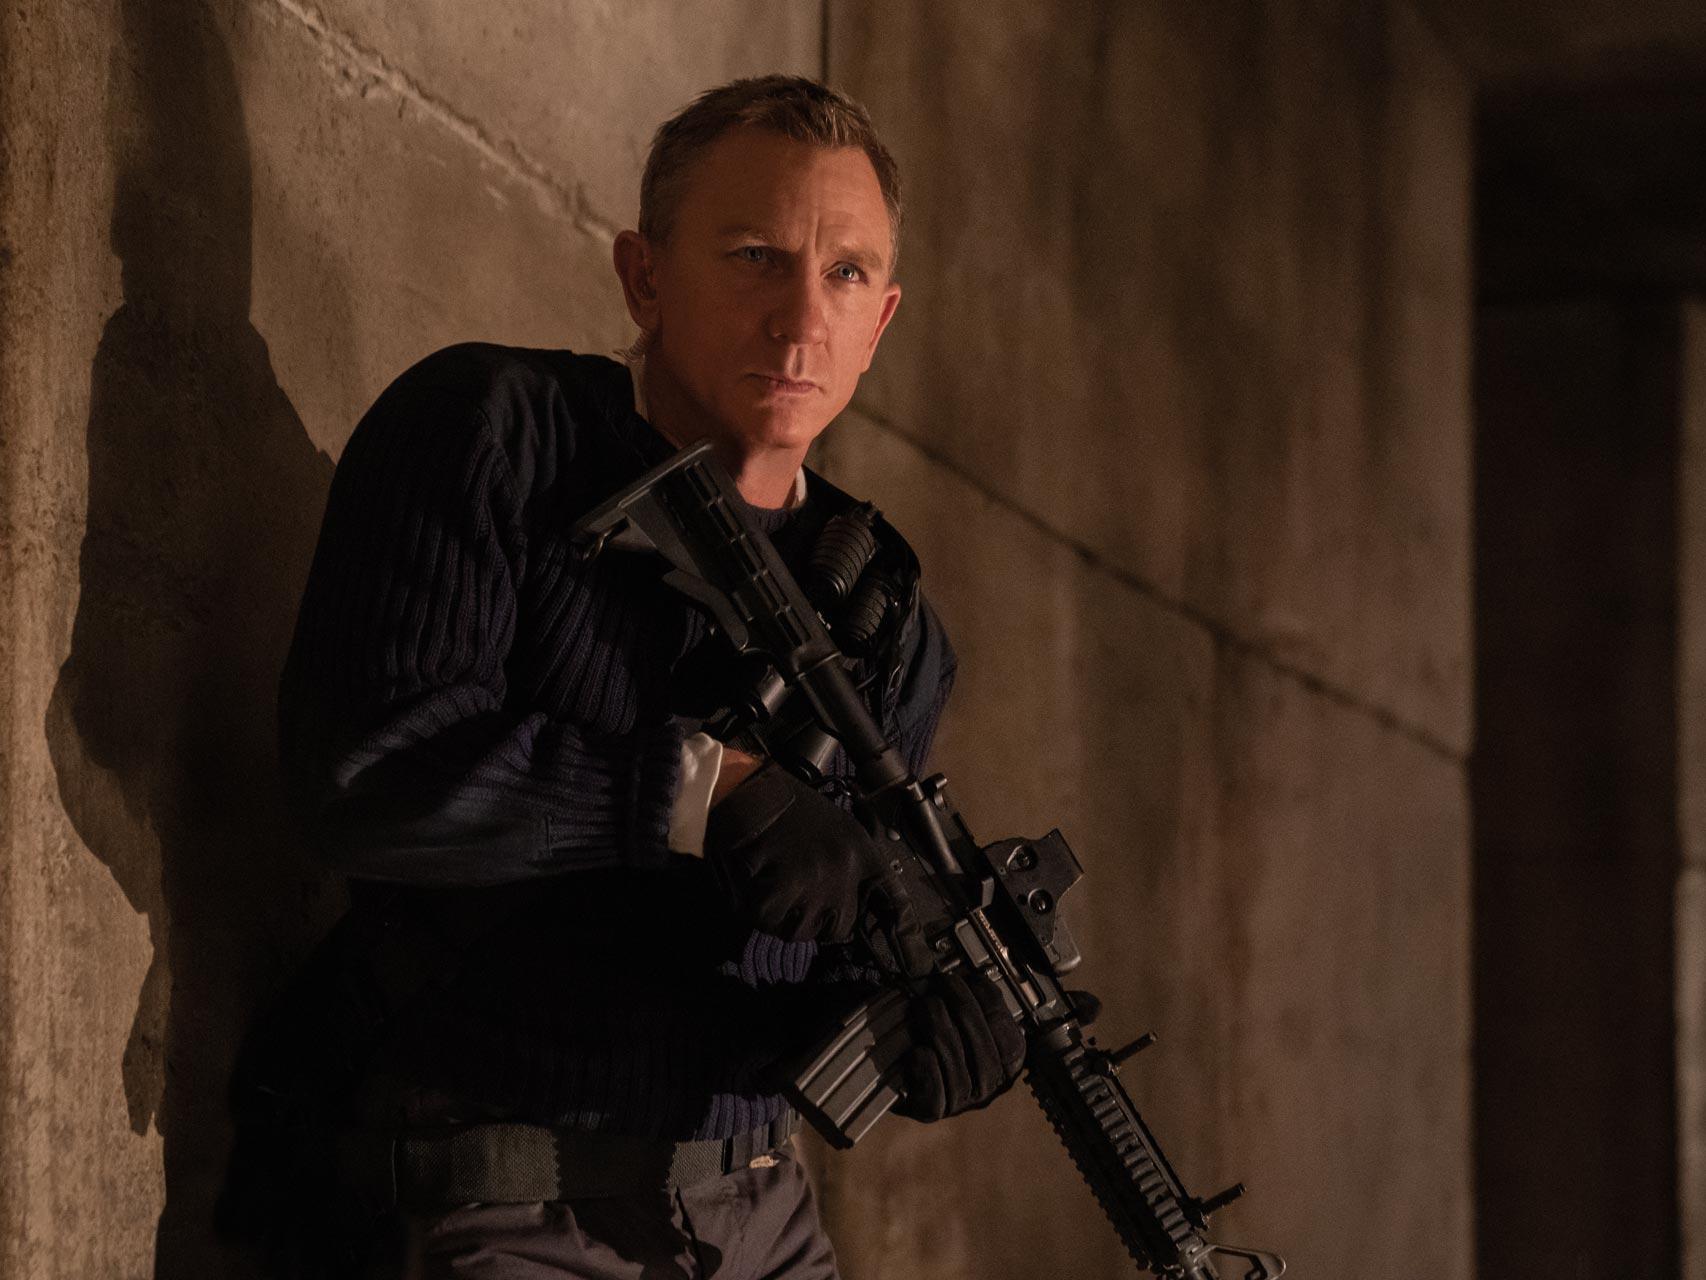 Daniel Craig returns for his final outing as James Bond in ‘No Time to Die'